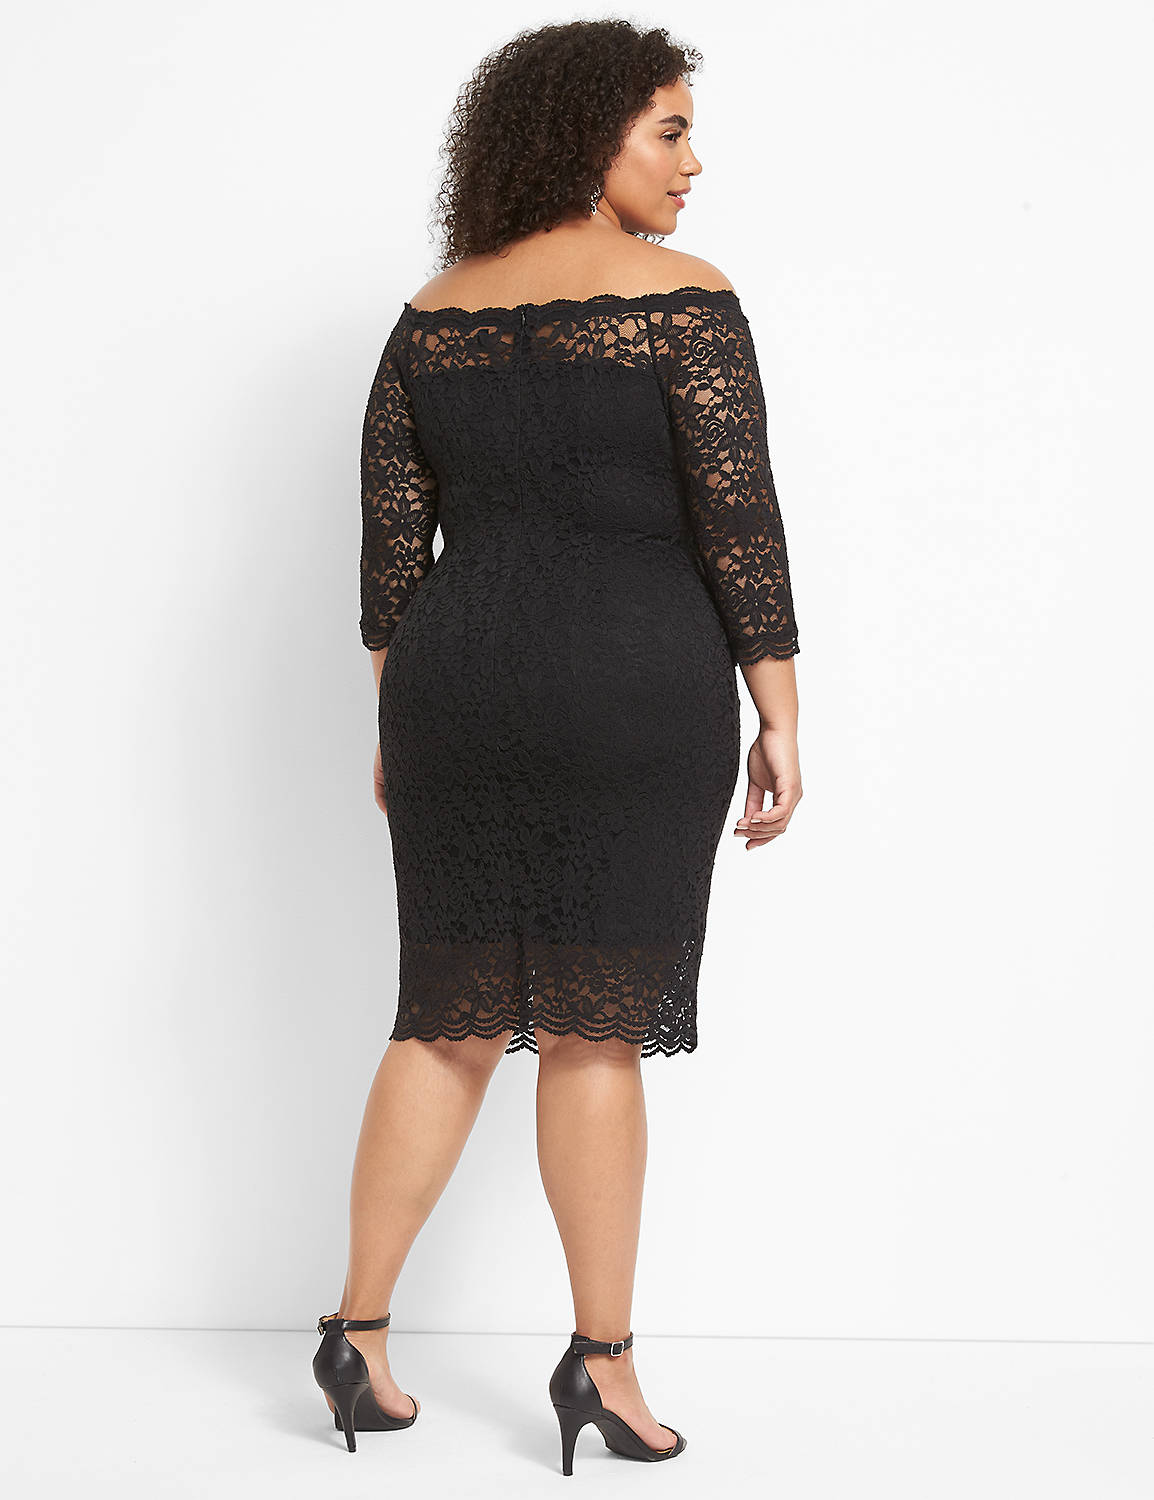 Off-The-Shoulder Stretch Lace Sheath Dress Product Image 2